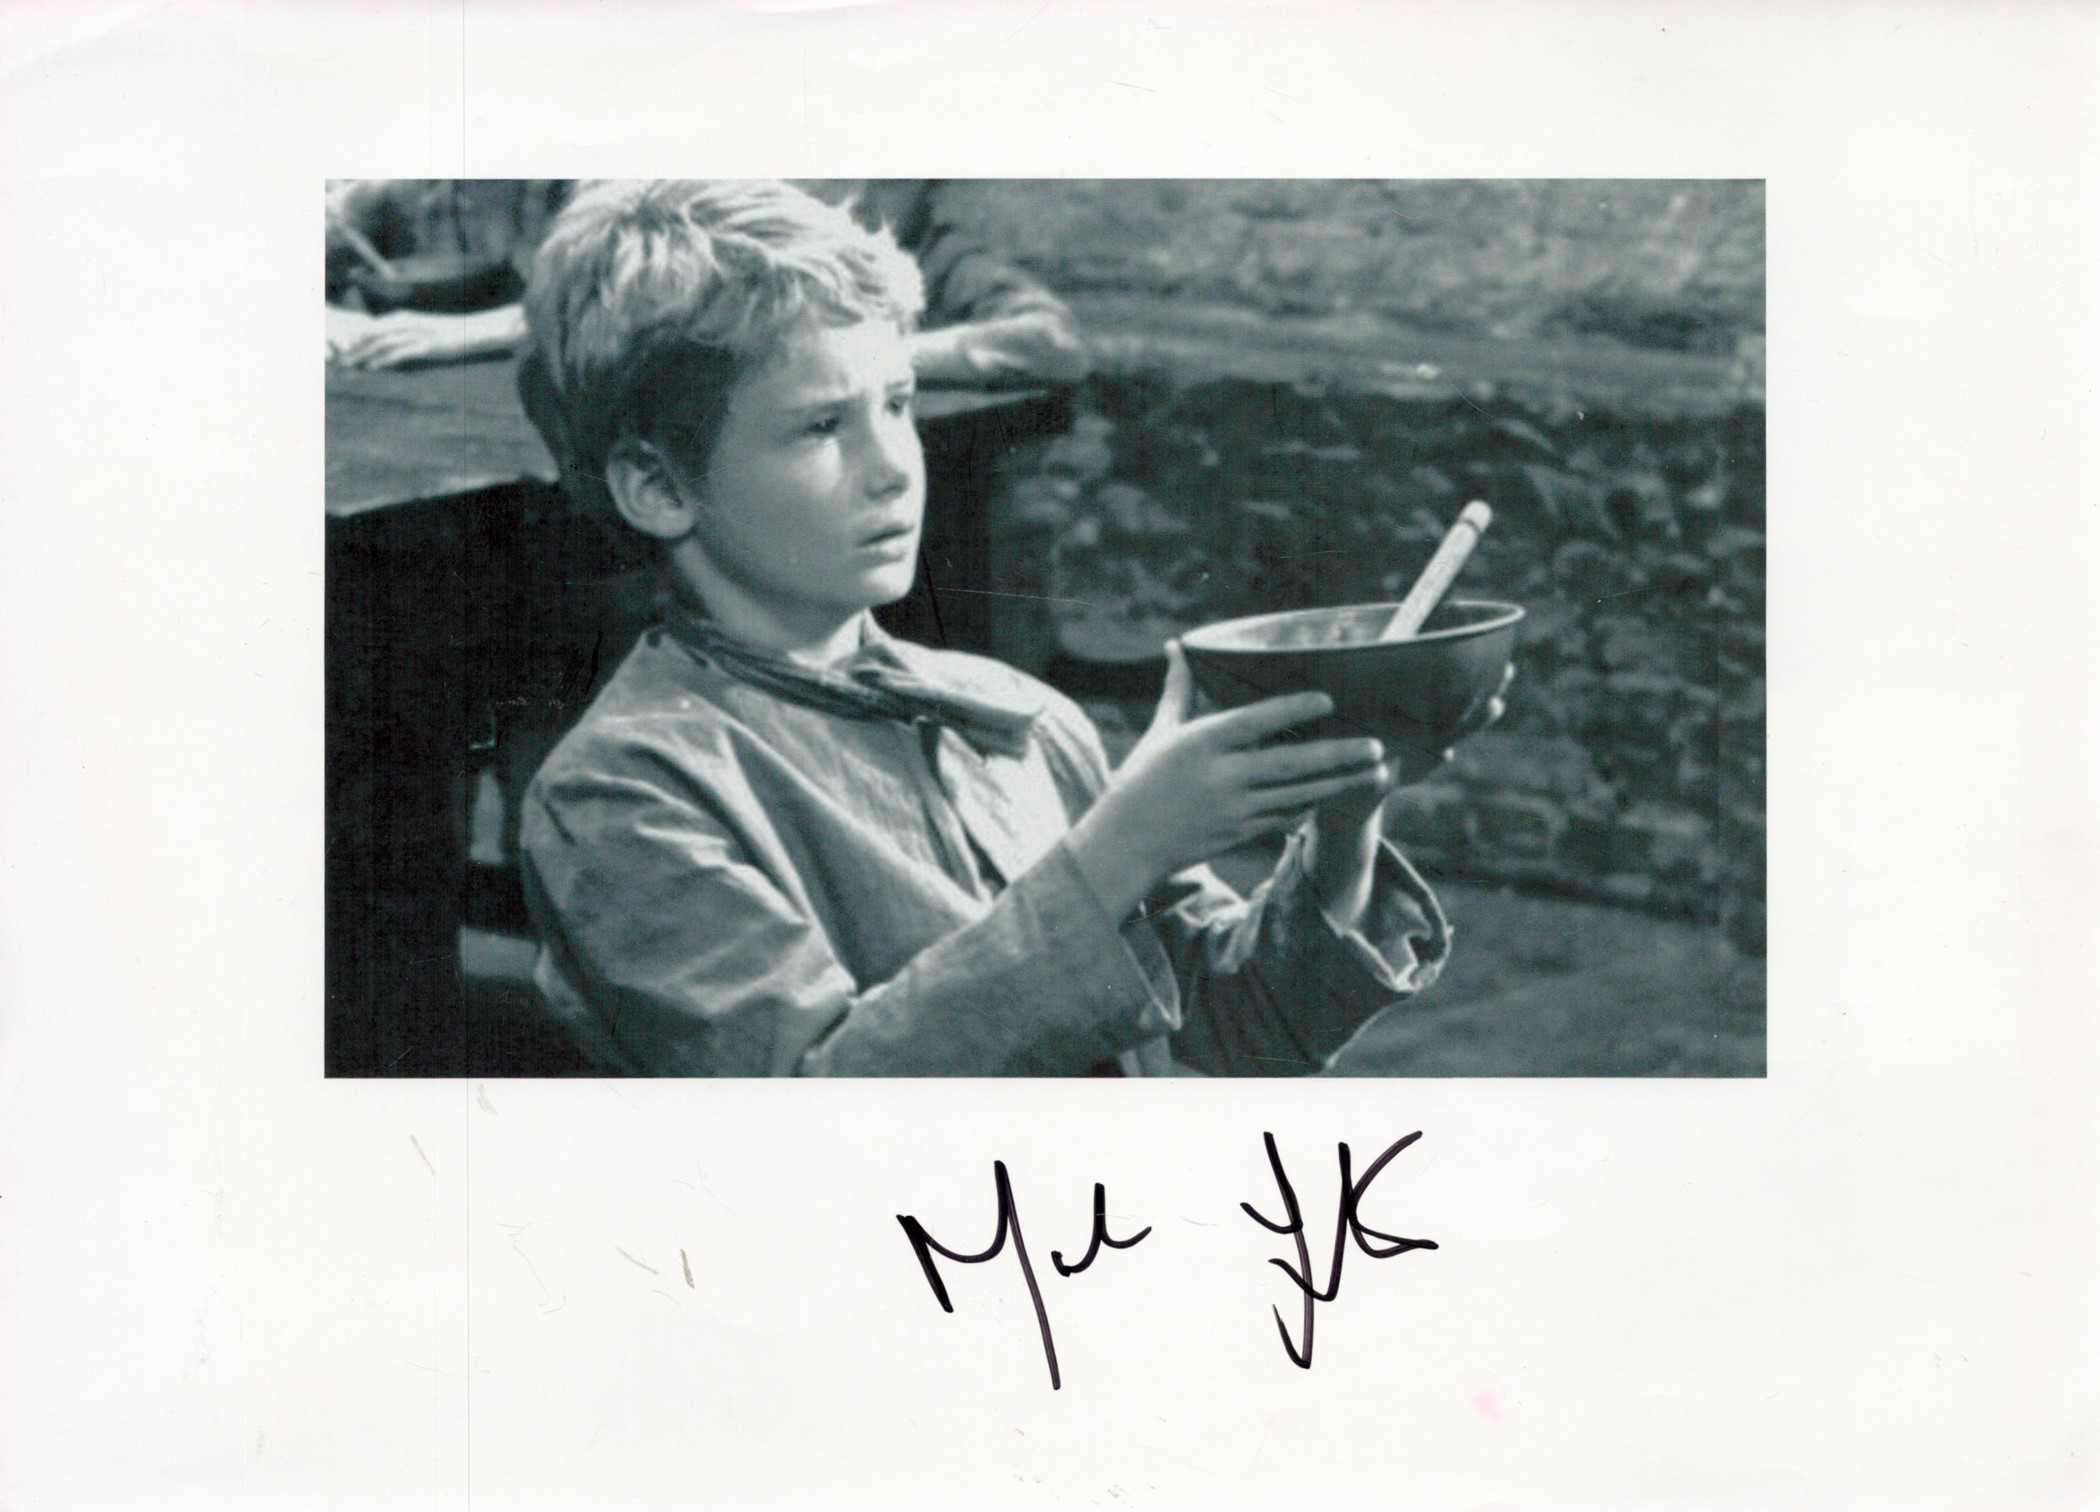 Mark Lester (Oliver Twist) Signed 12x8 inch Black and White Photo. Good condition. All autographs